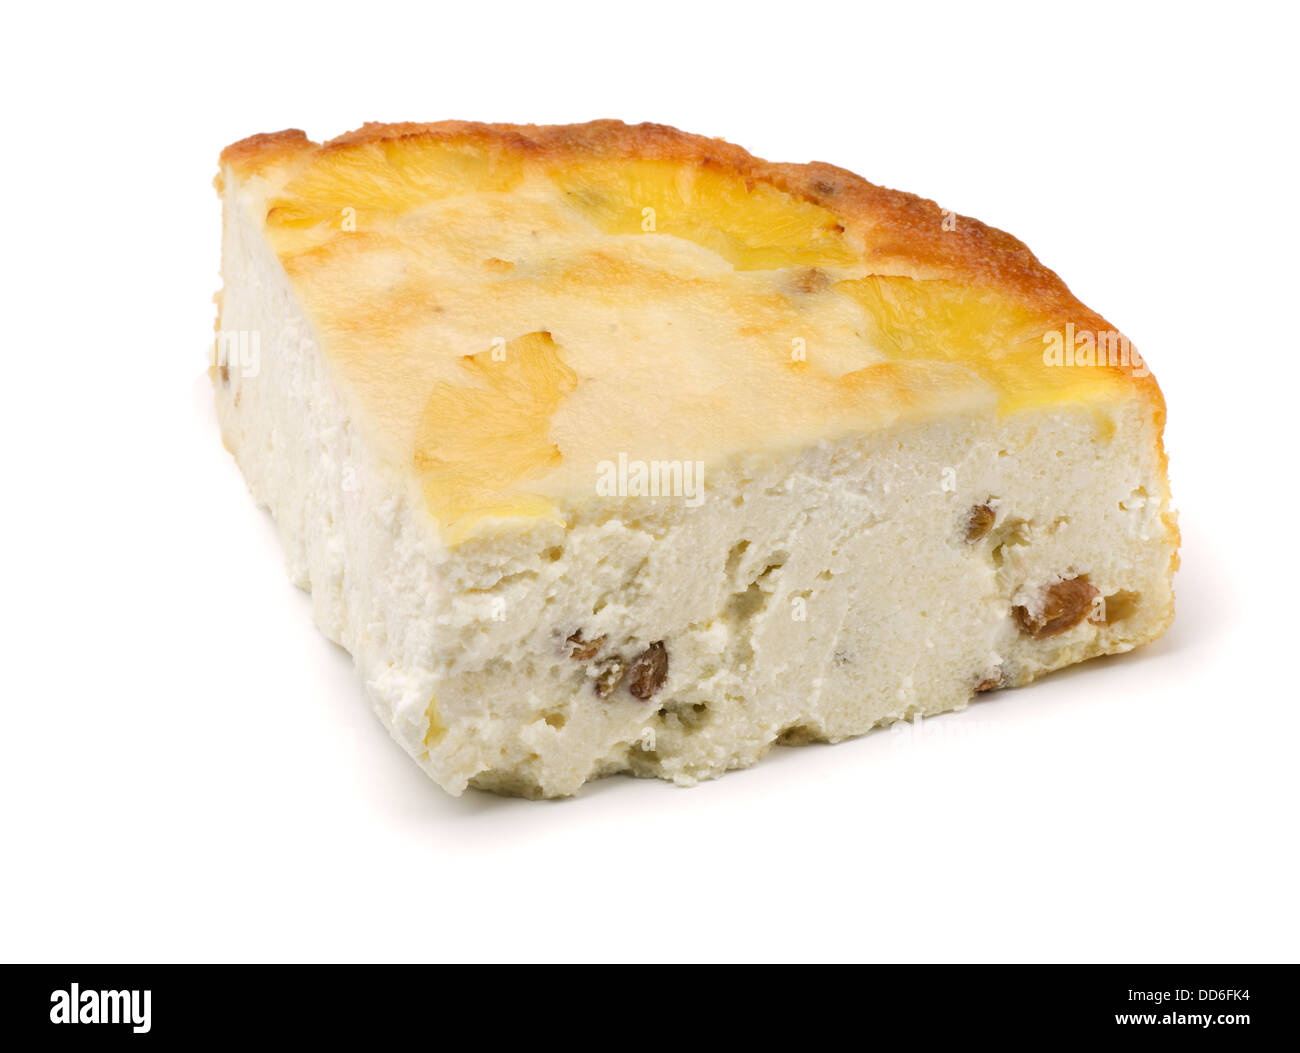 Piece of curd cheese pie with raisins isolated on white Stock Photo